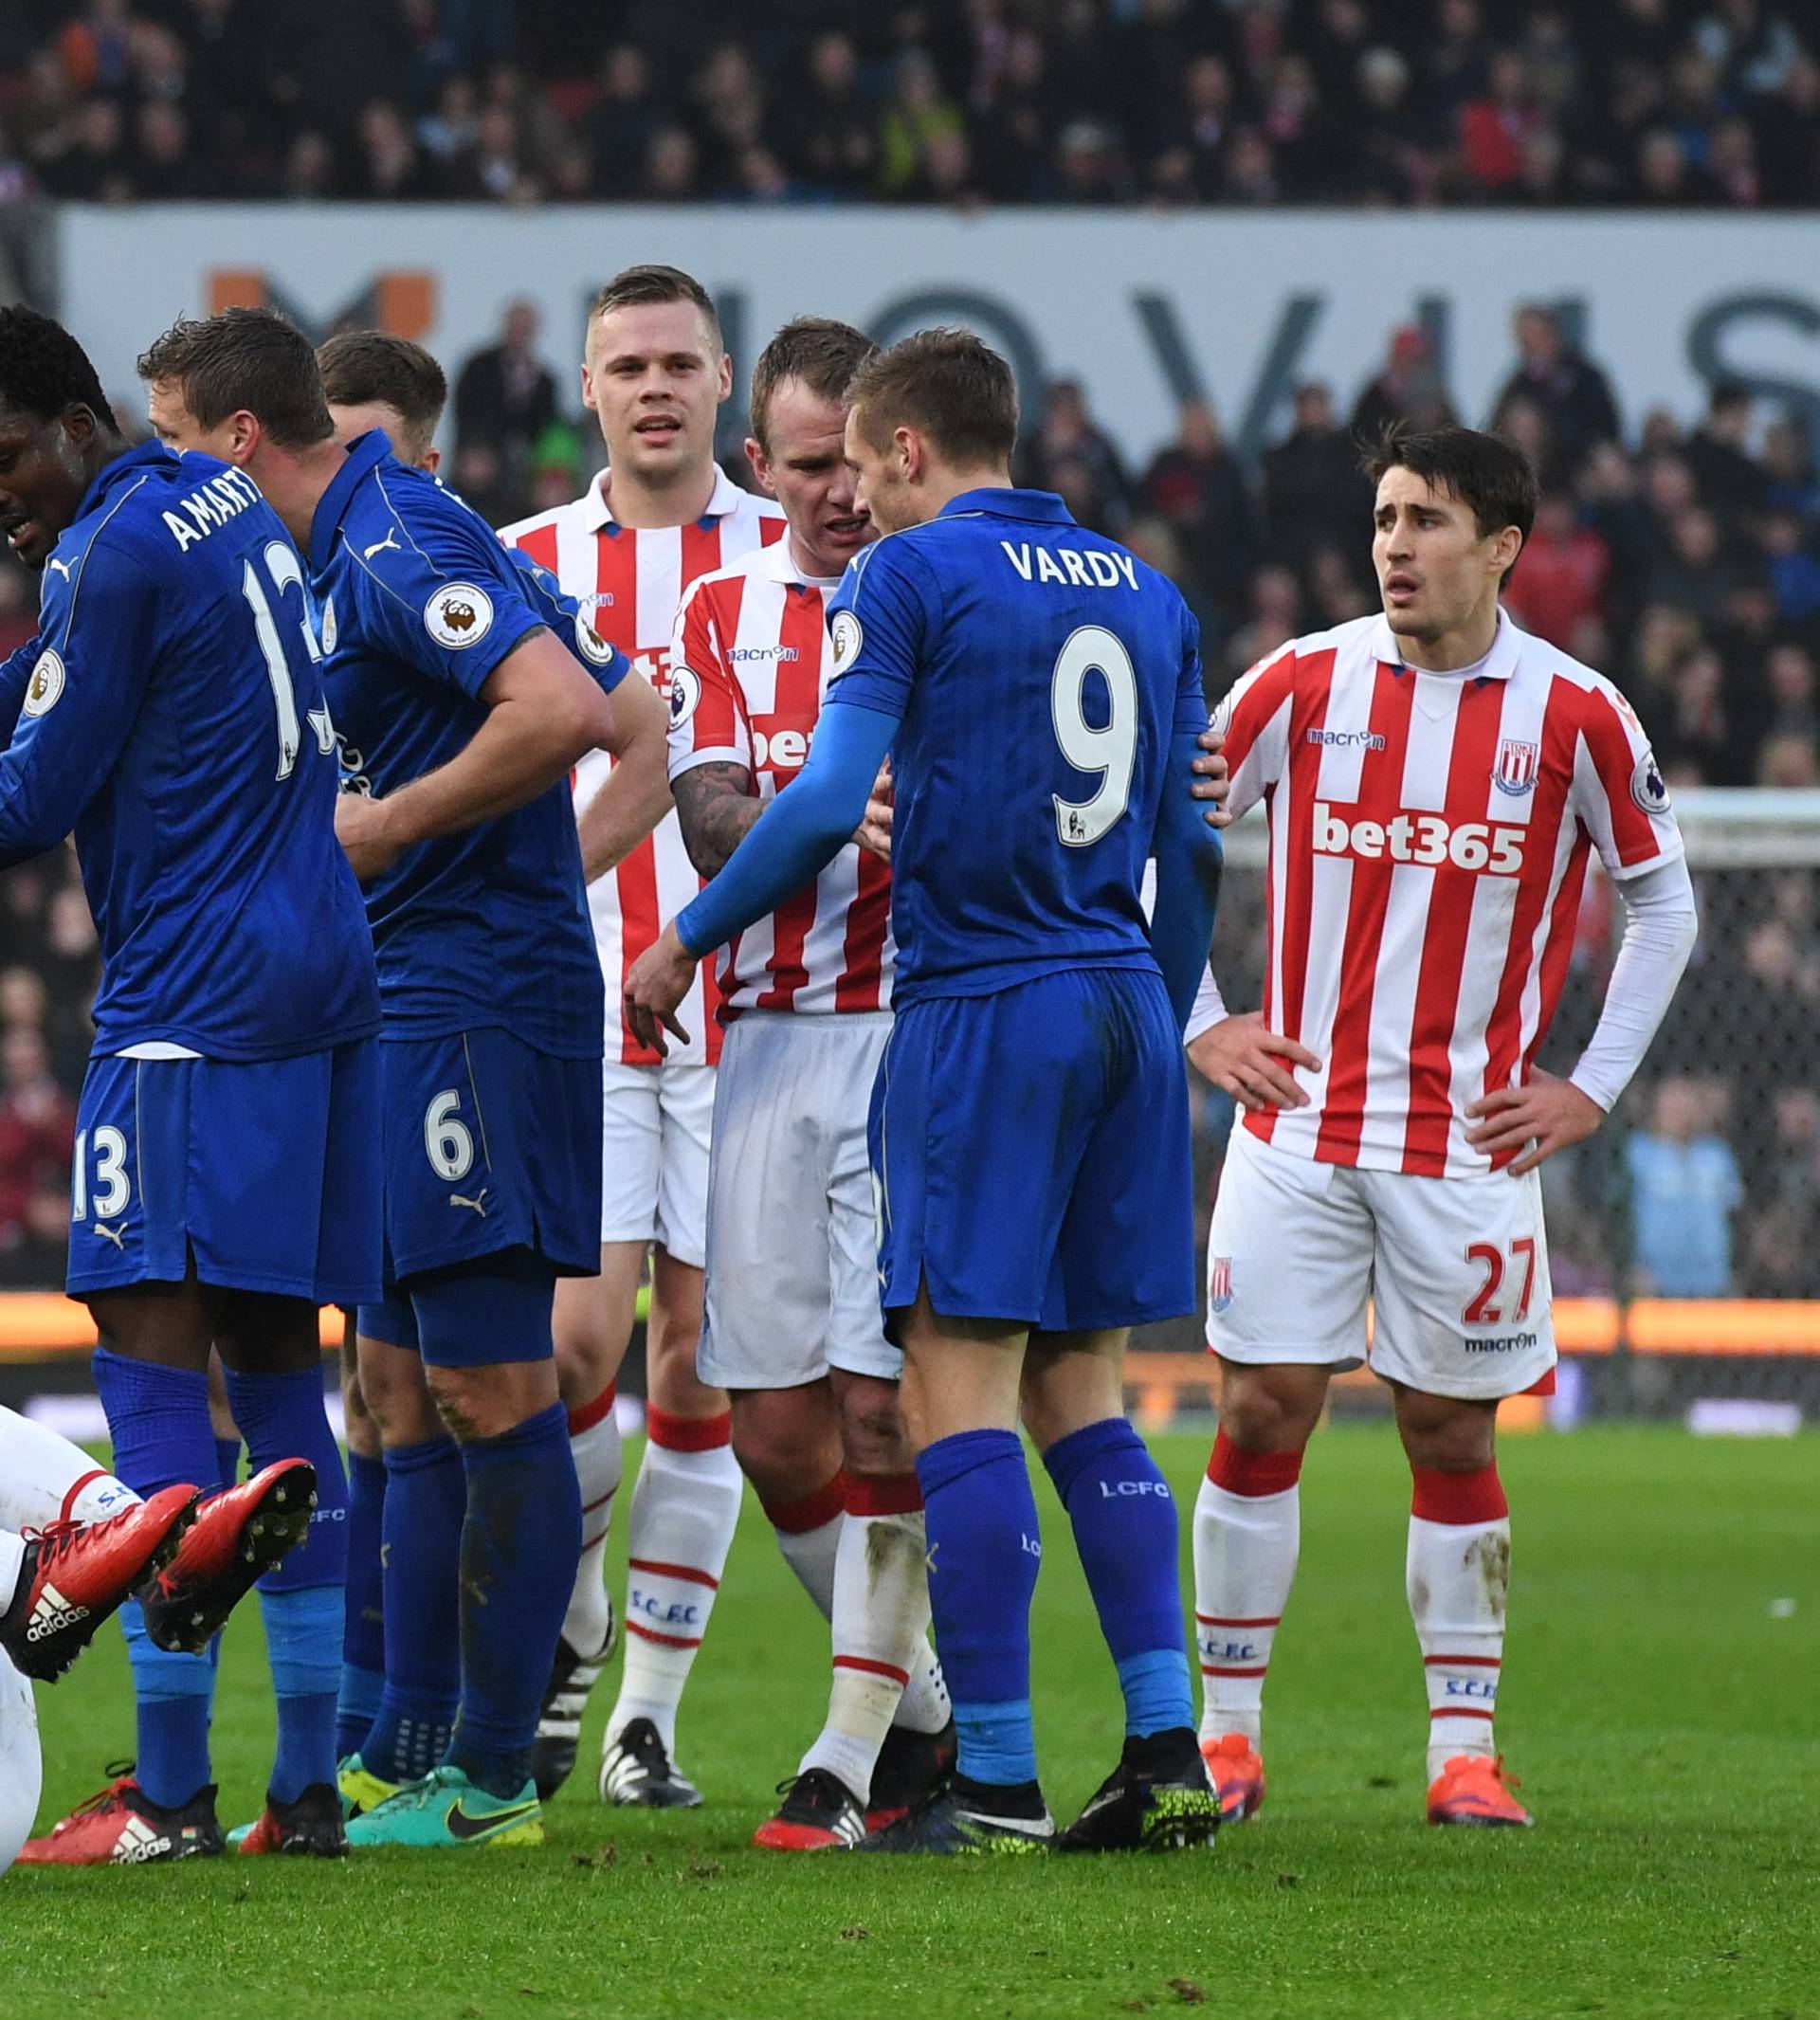 Stoke City's Mame Biram Diouf is down injured after being fouled by Leicester City's Jamie Vardy